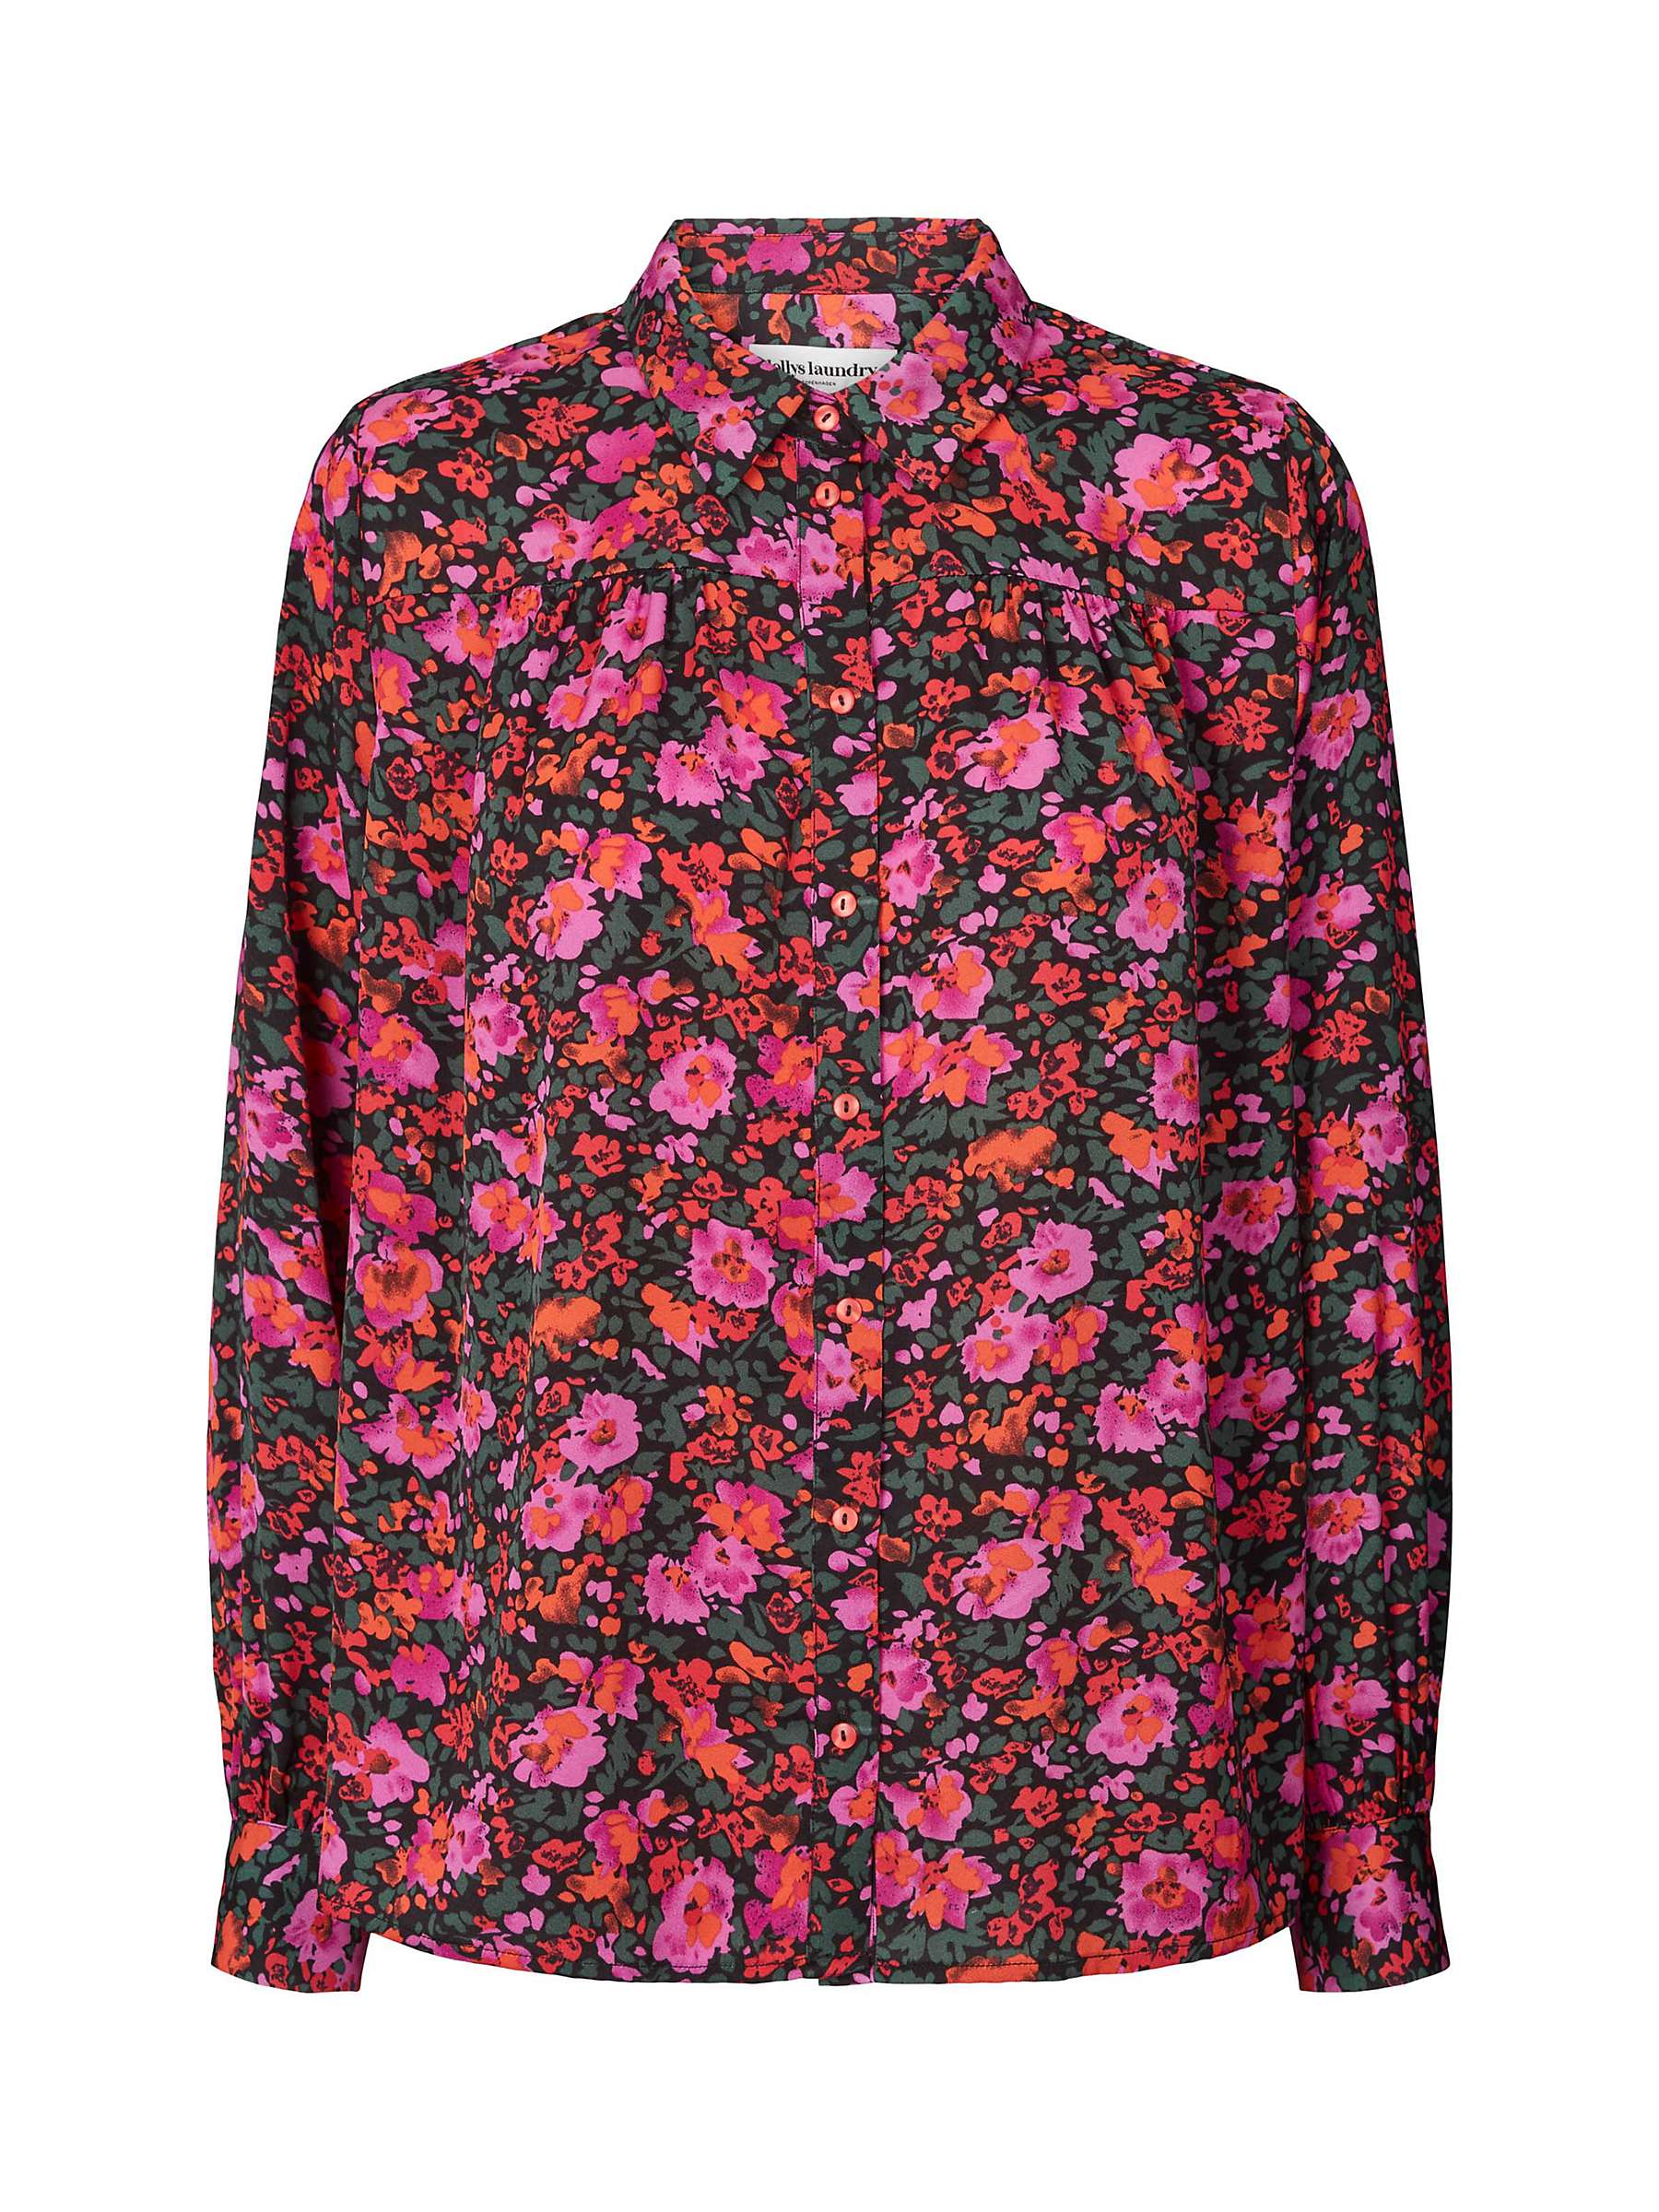 Lollys Laundry Allison Floral Print Shirt, Red at John Lewis & Partners